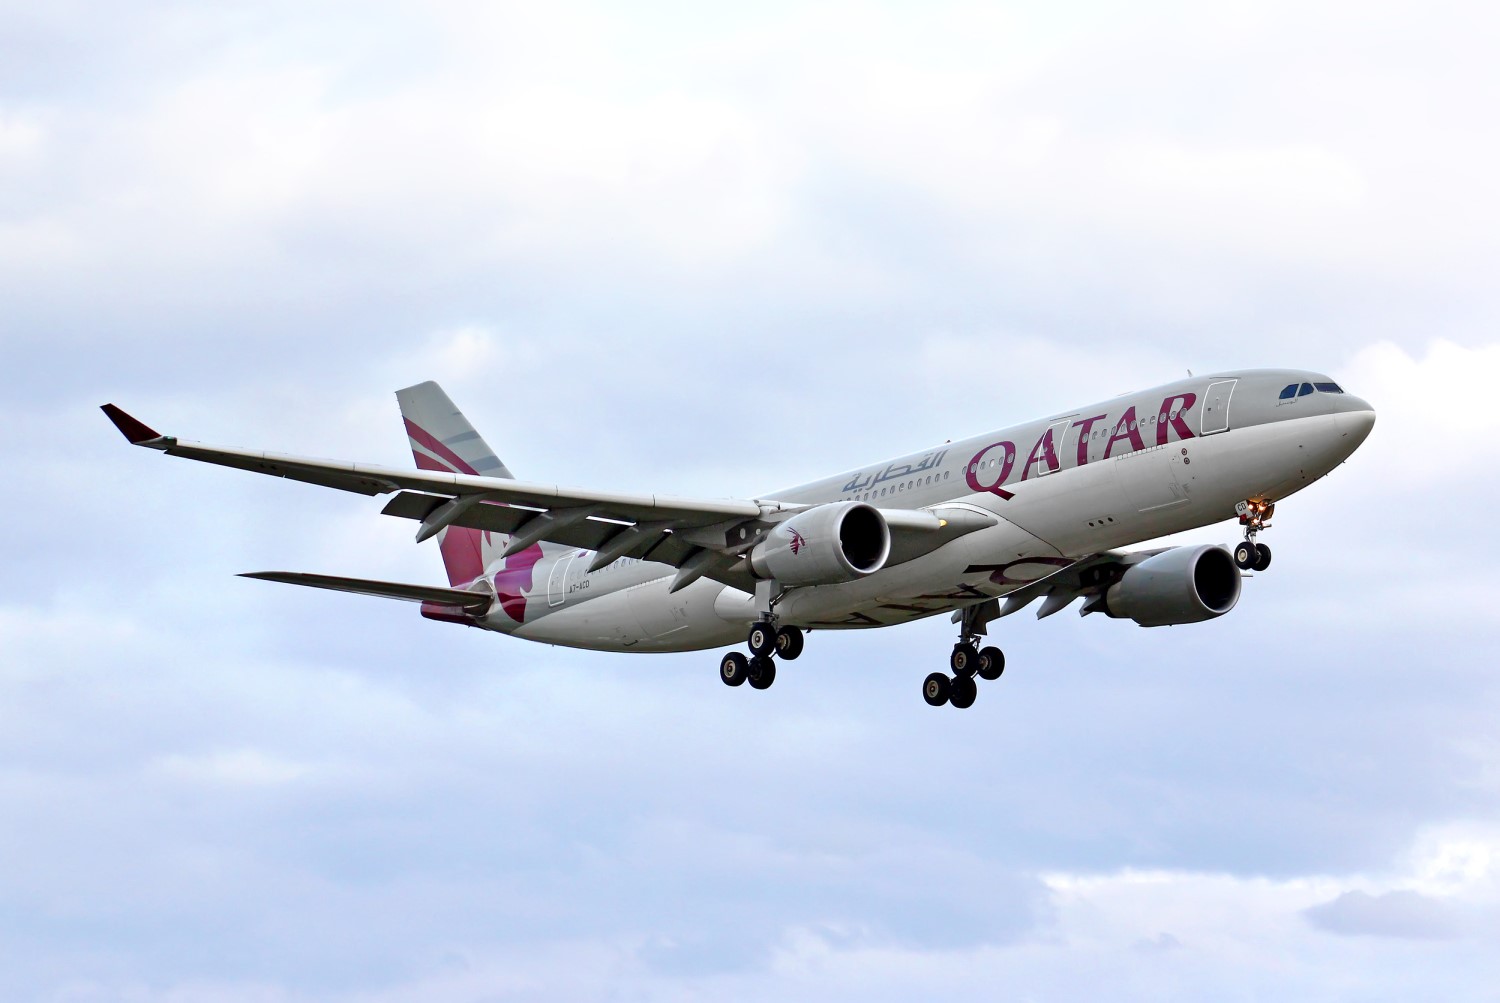 Qatar Airways flies to almost 100 countries!